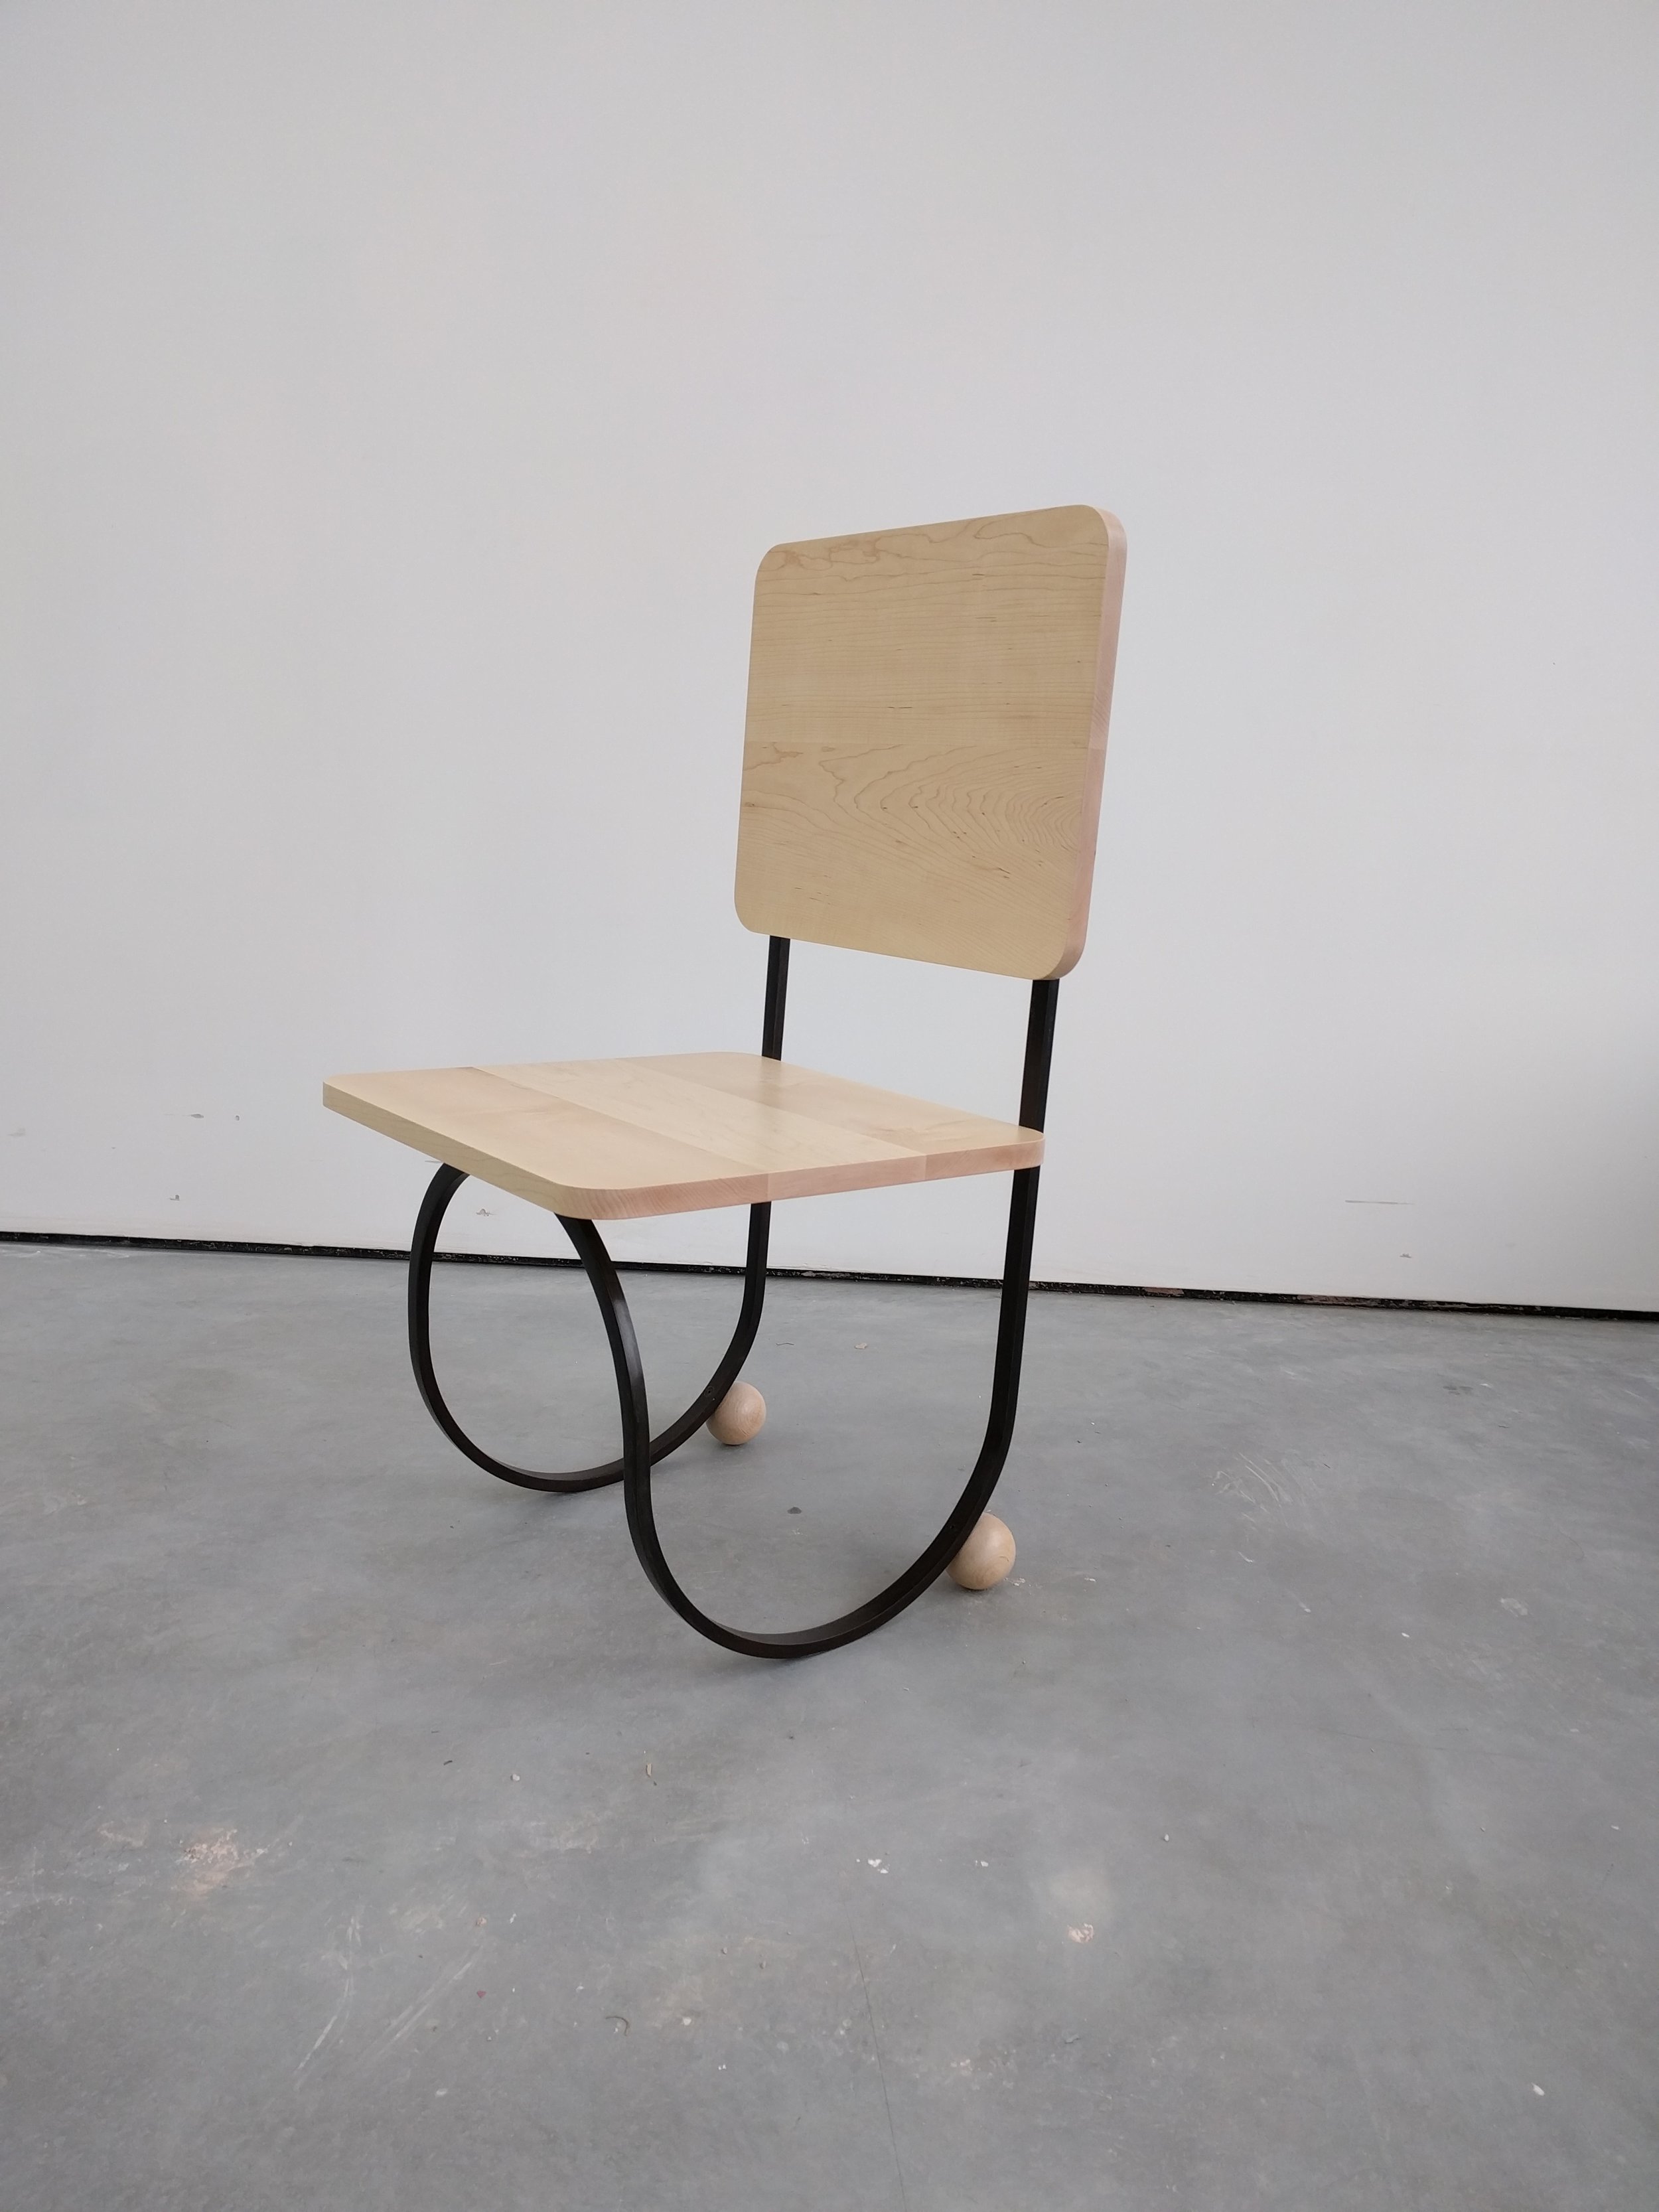  Charles Avery,&nbsp; Untitled (Chair #2) ,&nbsp;2016,&nbsp;Patinated bronze, maple wood,&nbsp;87.5 x 45 x 44 cm,&nbsp;AP from edition of 6 + 1 AP,&nbsp;Courtesy the artist, Grimm Gallery, Amsterdam and Pilar Corrias, London 